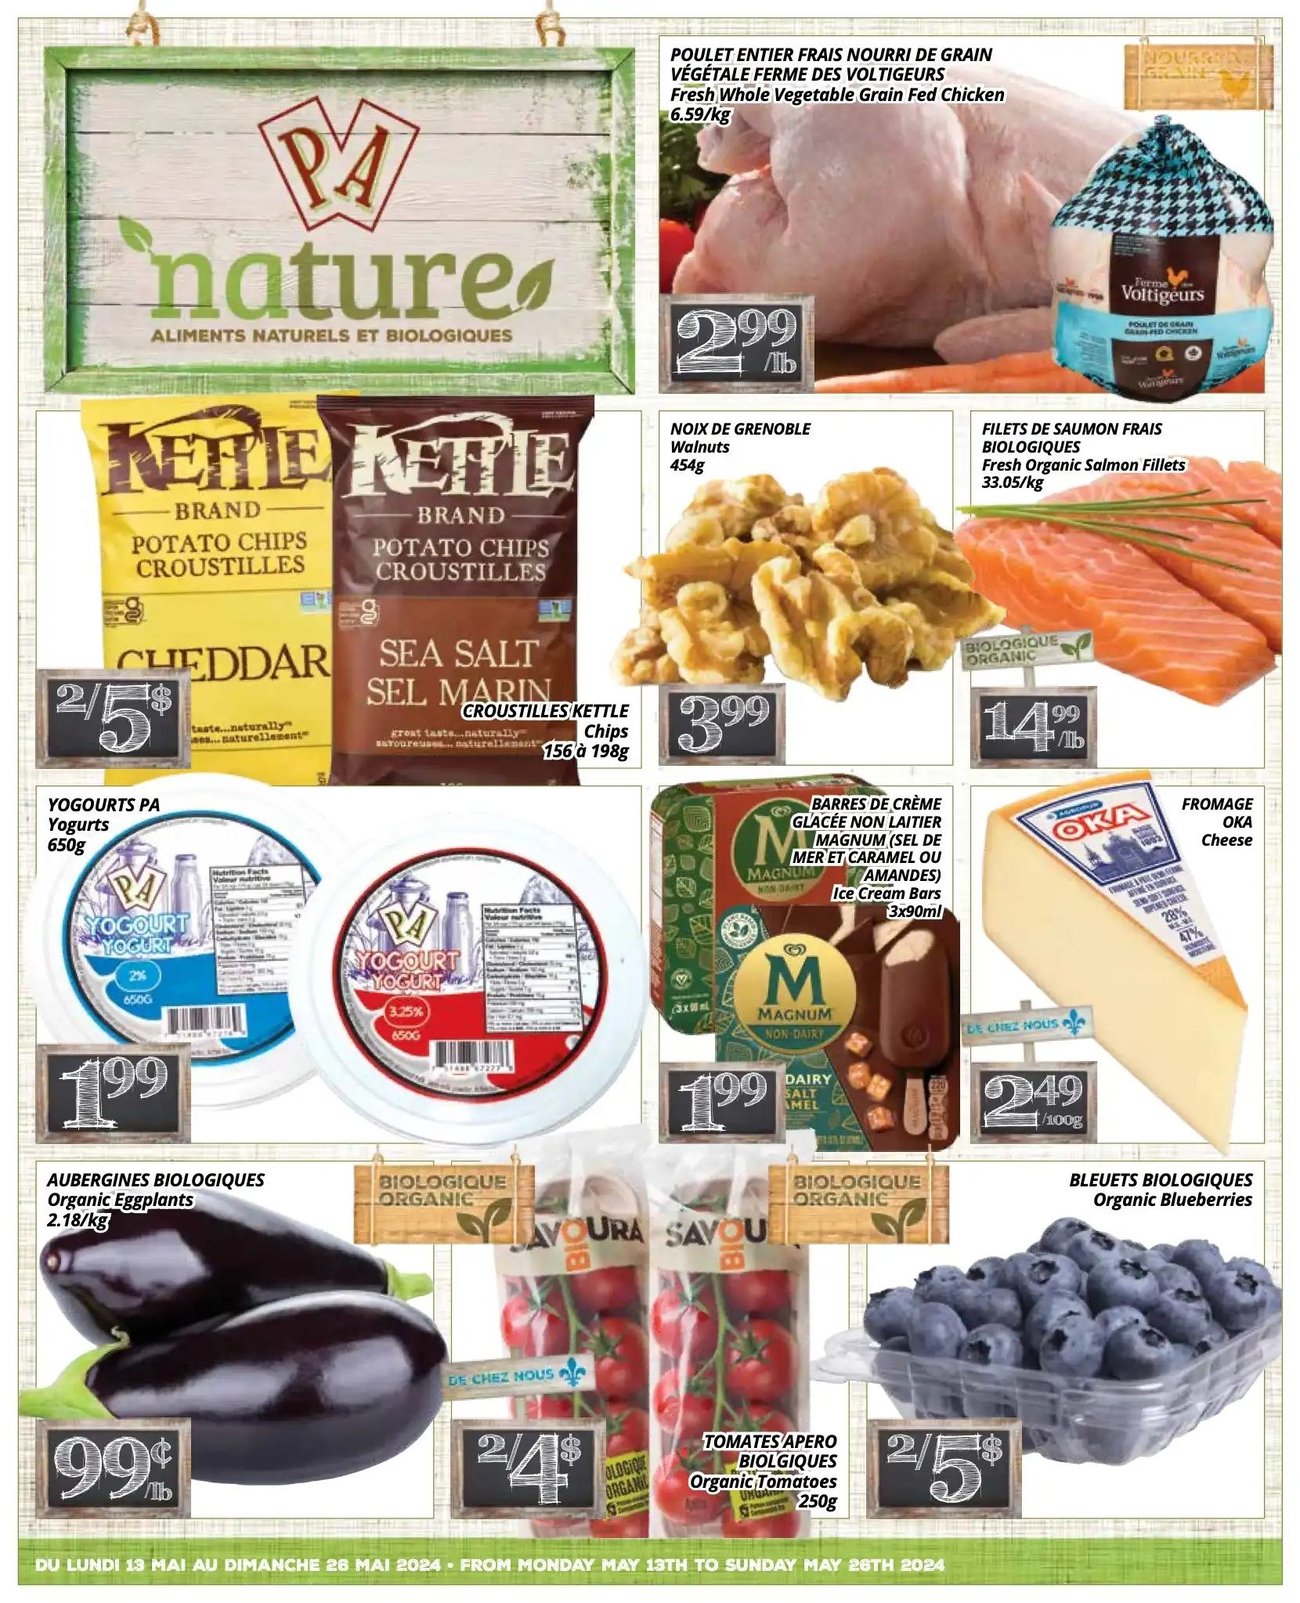 PA Nature - Flyer Specials - Page 1